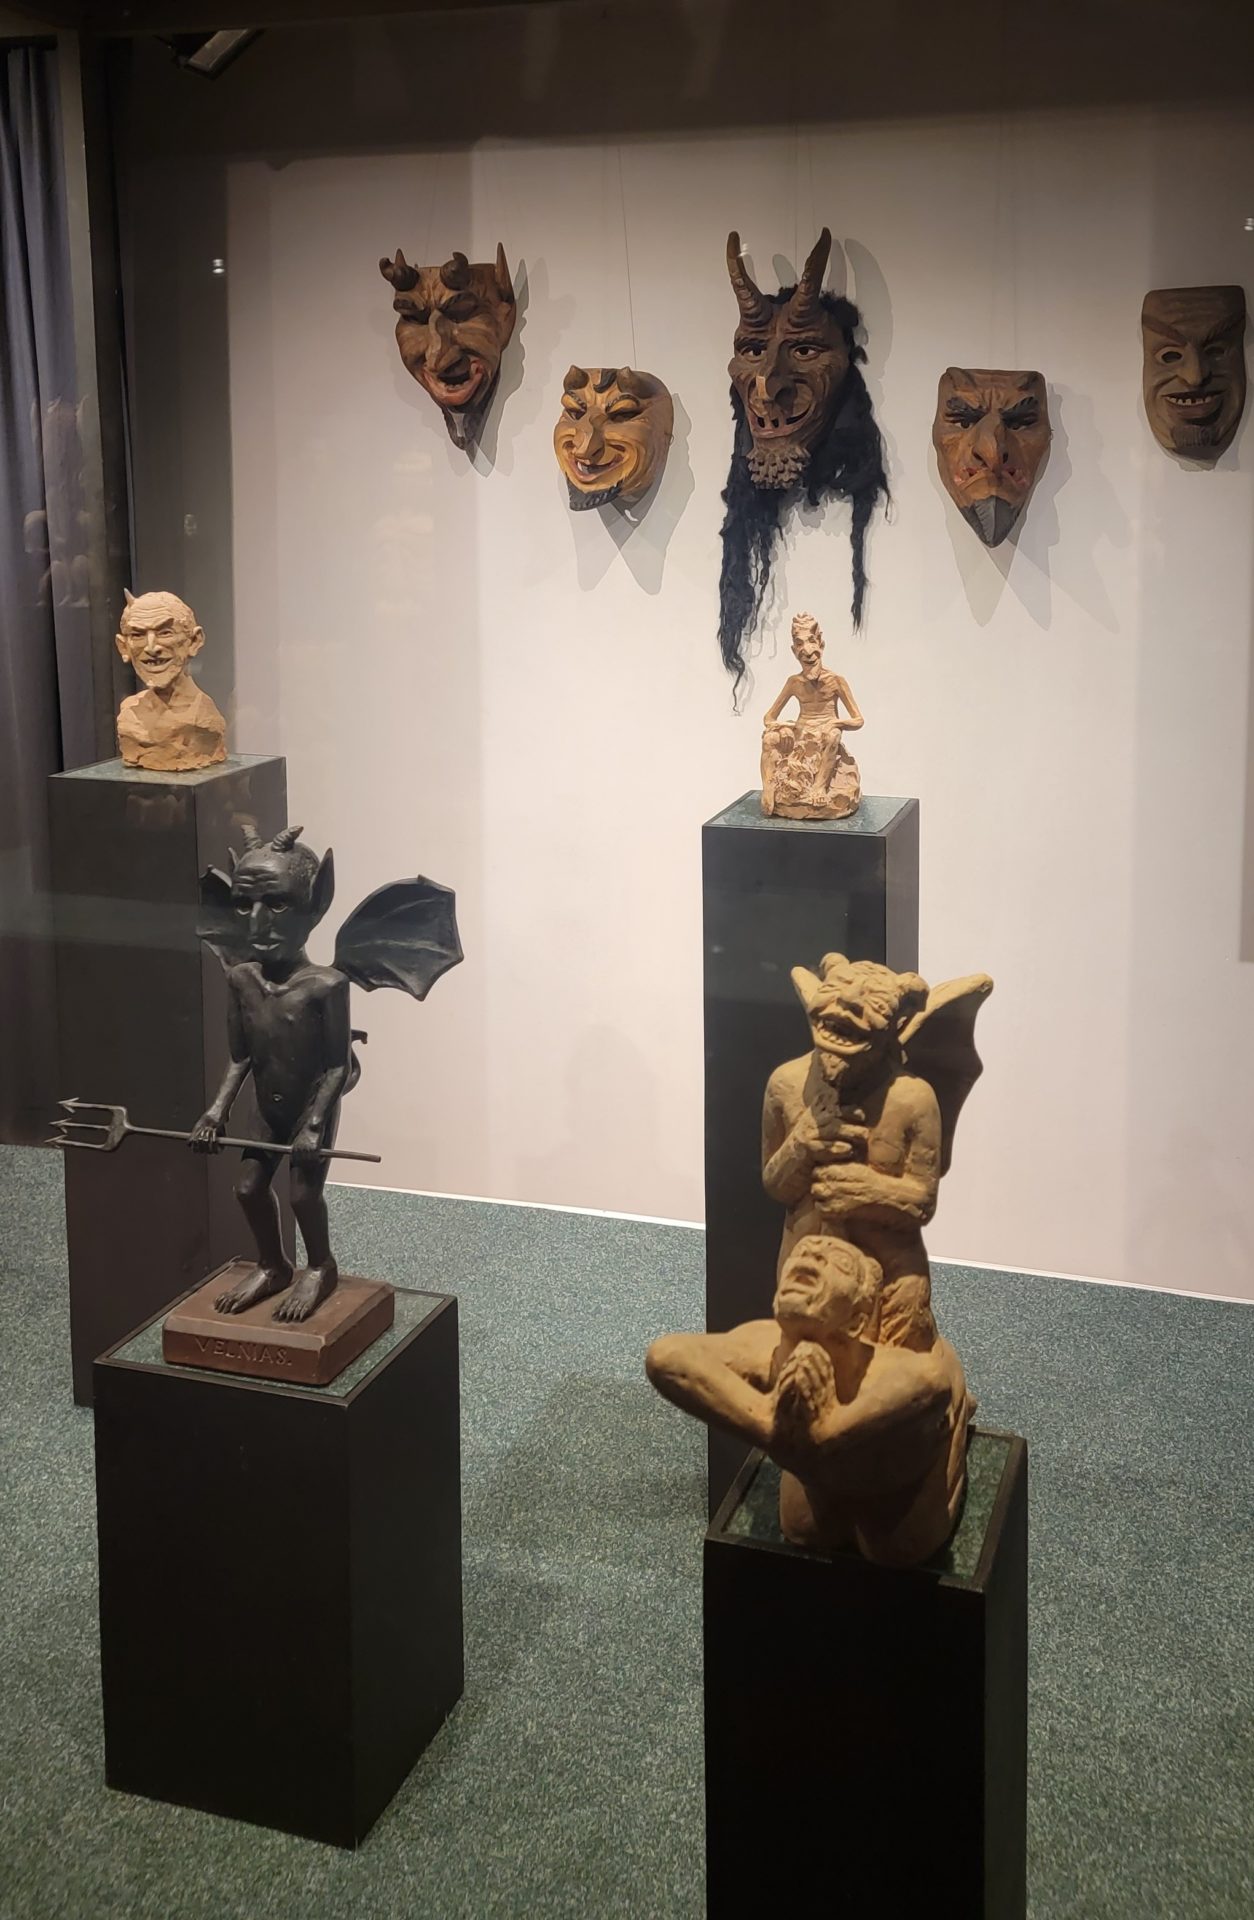 statues on display in a room